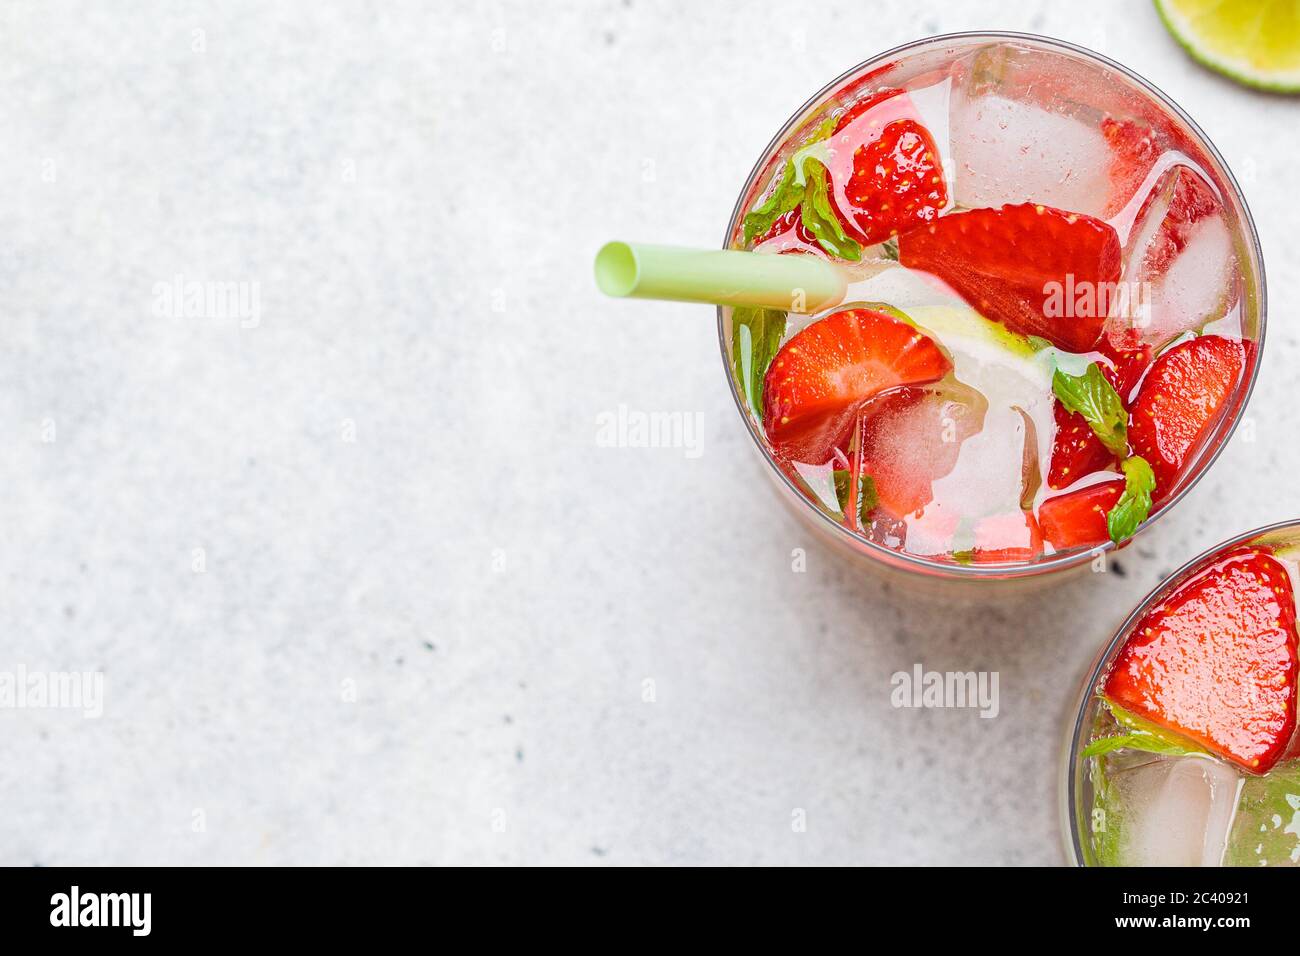 Detox sassy water with strawberry and lime in glasses. Healthy eating concept. Stock Photo